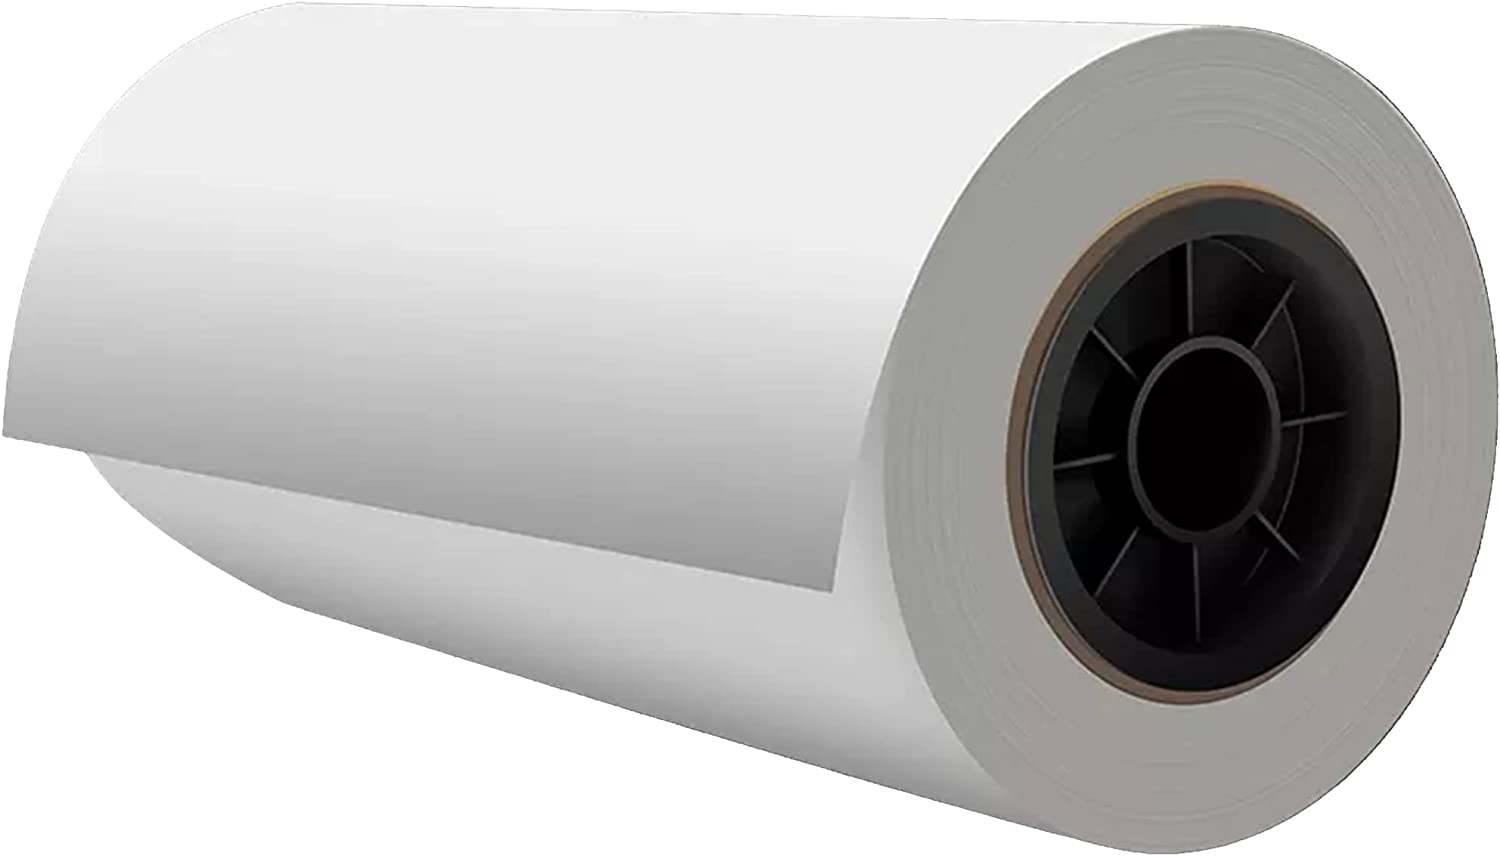 NGOODIEZ DTF Film Roll - Premium Transfer Film for Direct to Film